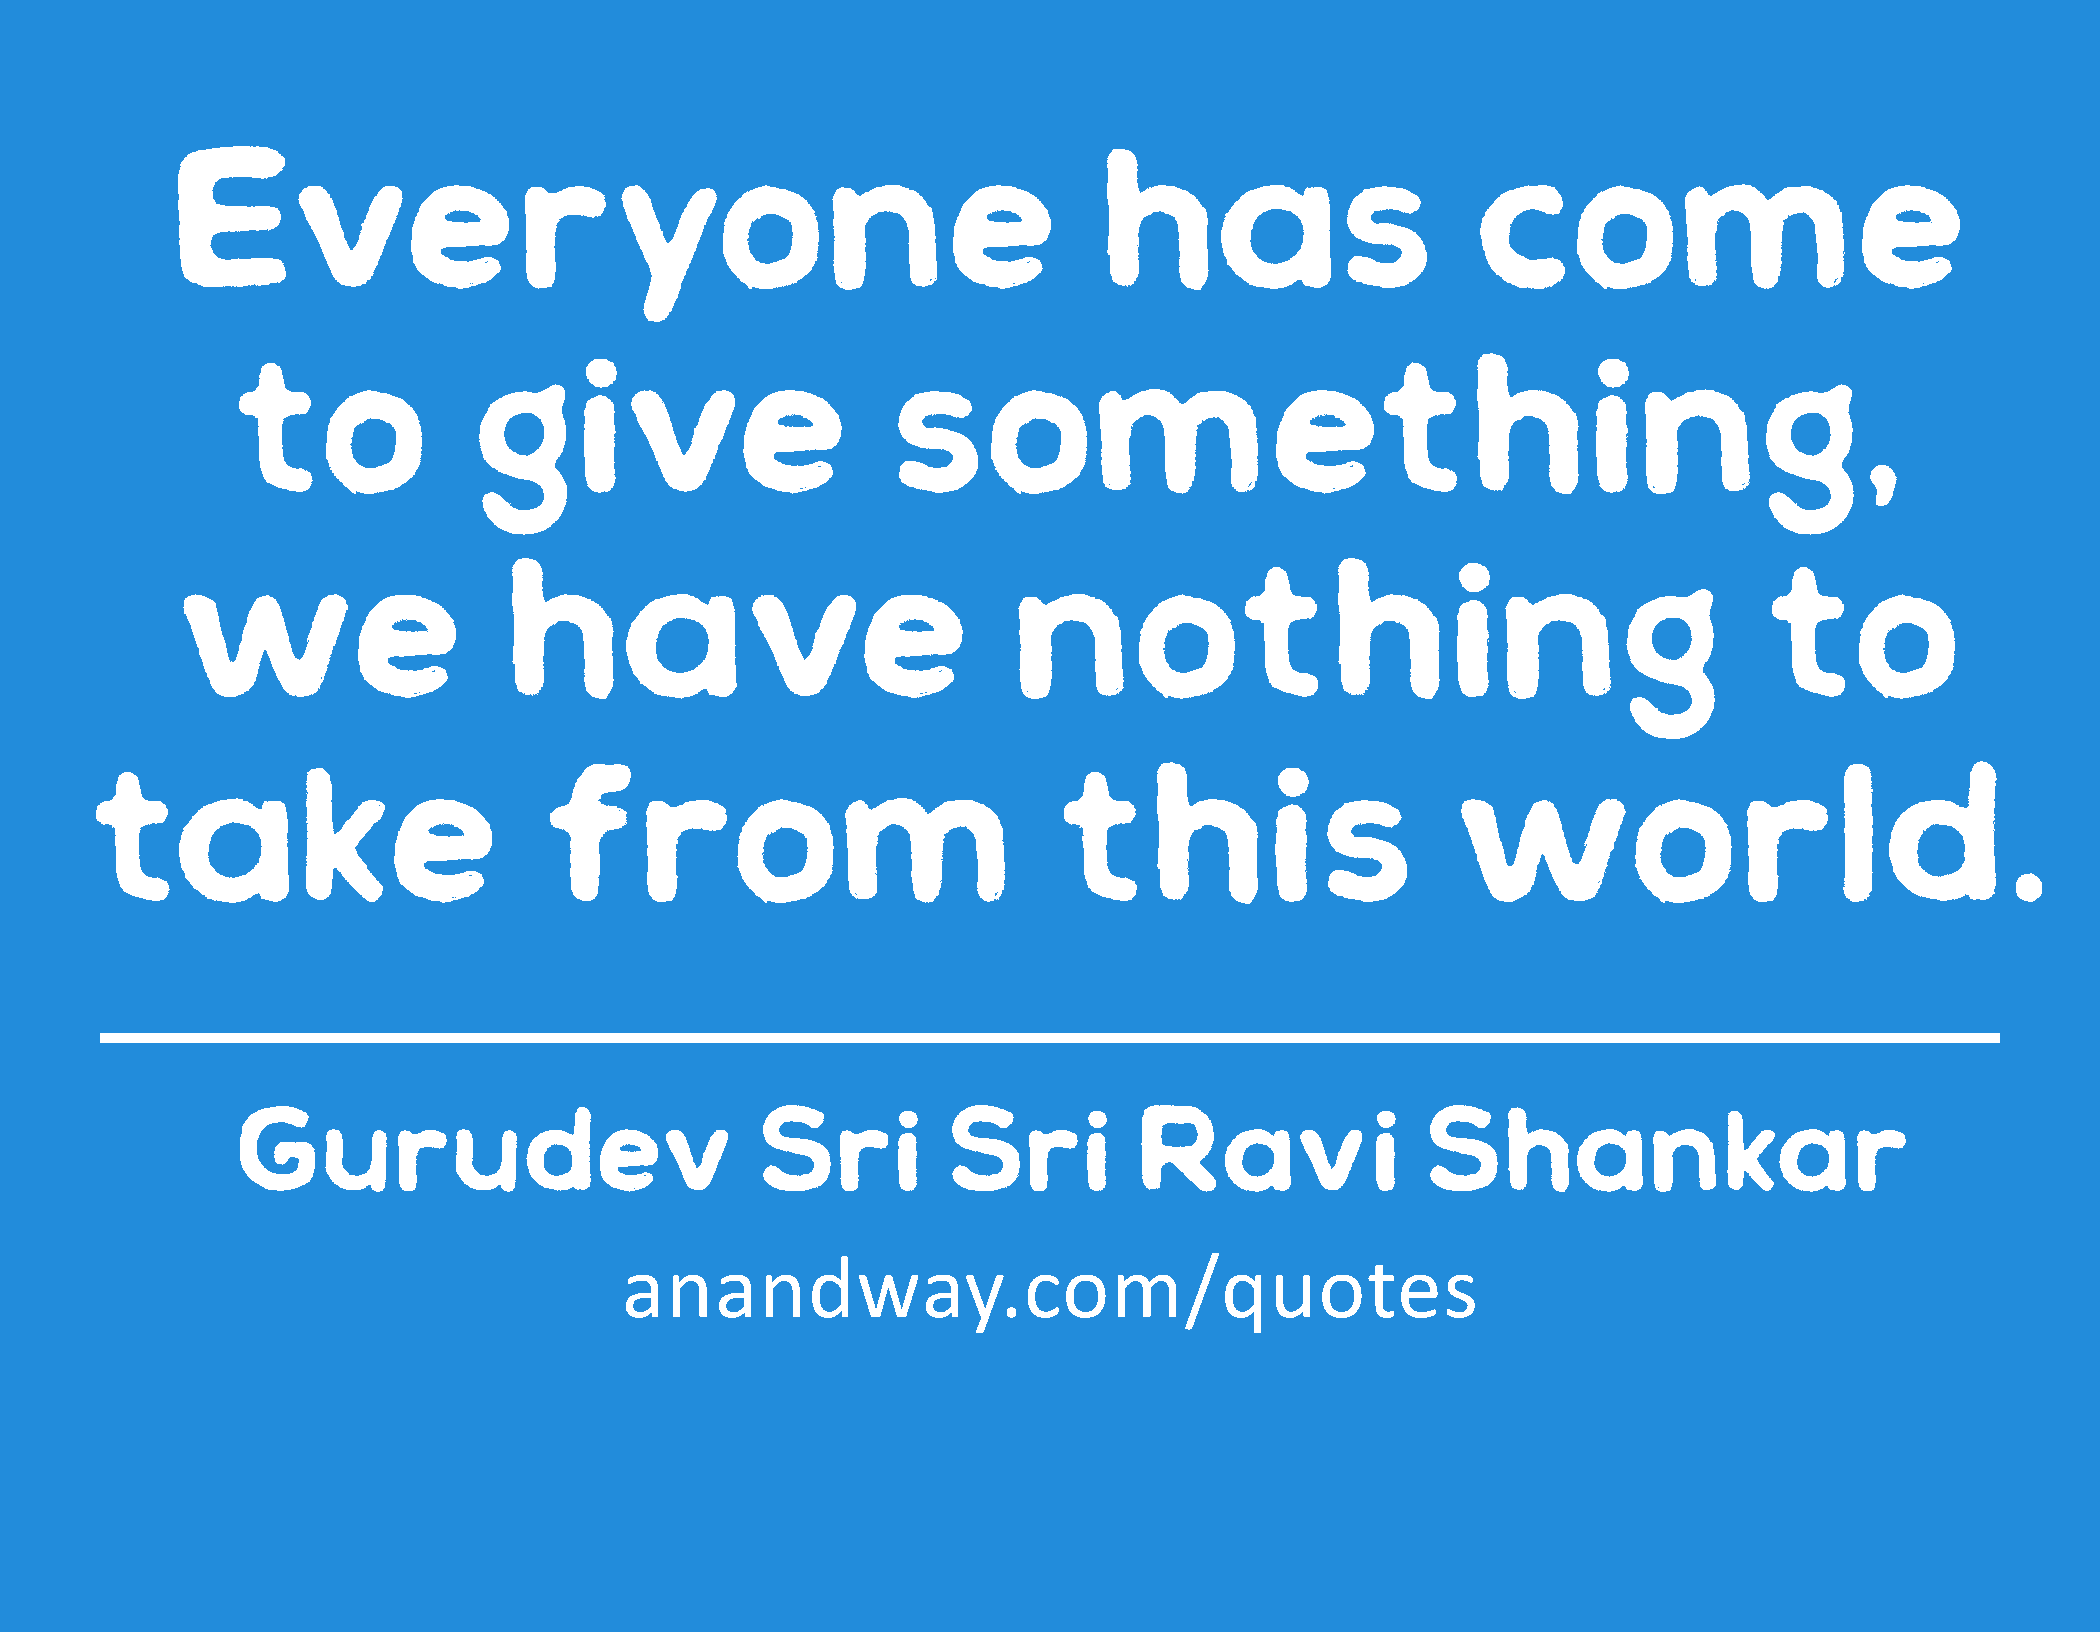 Everyone has come to give something, we have nothing to take from this world. 
 -Gurudev Sri Sri Ravi Shankar